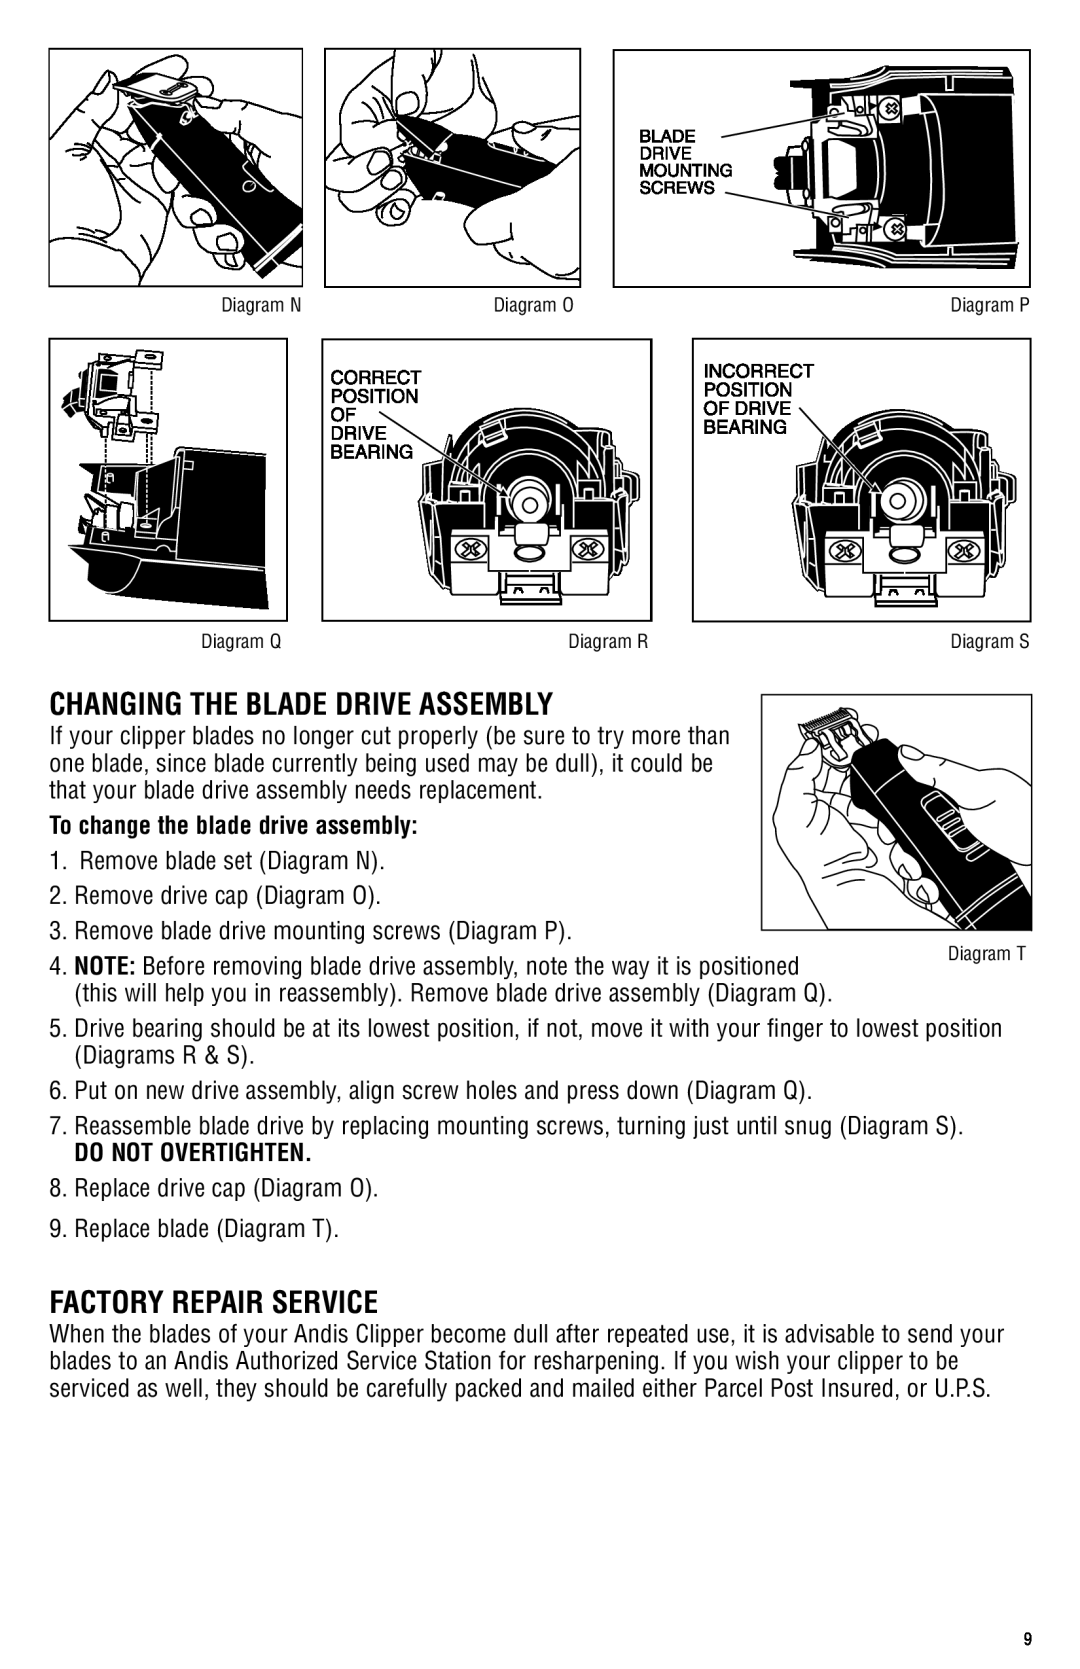 Andis Company AGRC manual changing the blade DRIVE assembly, factory repair service, To change the blade drive assembly 